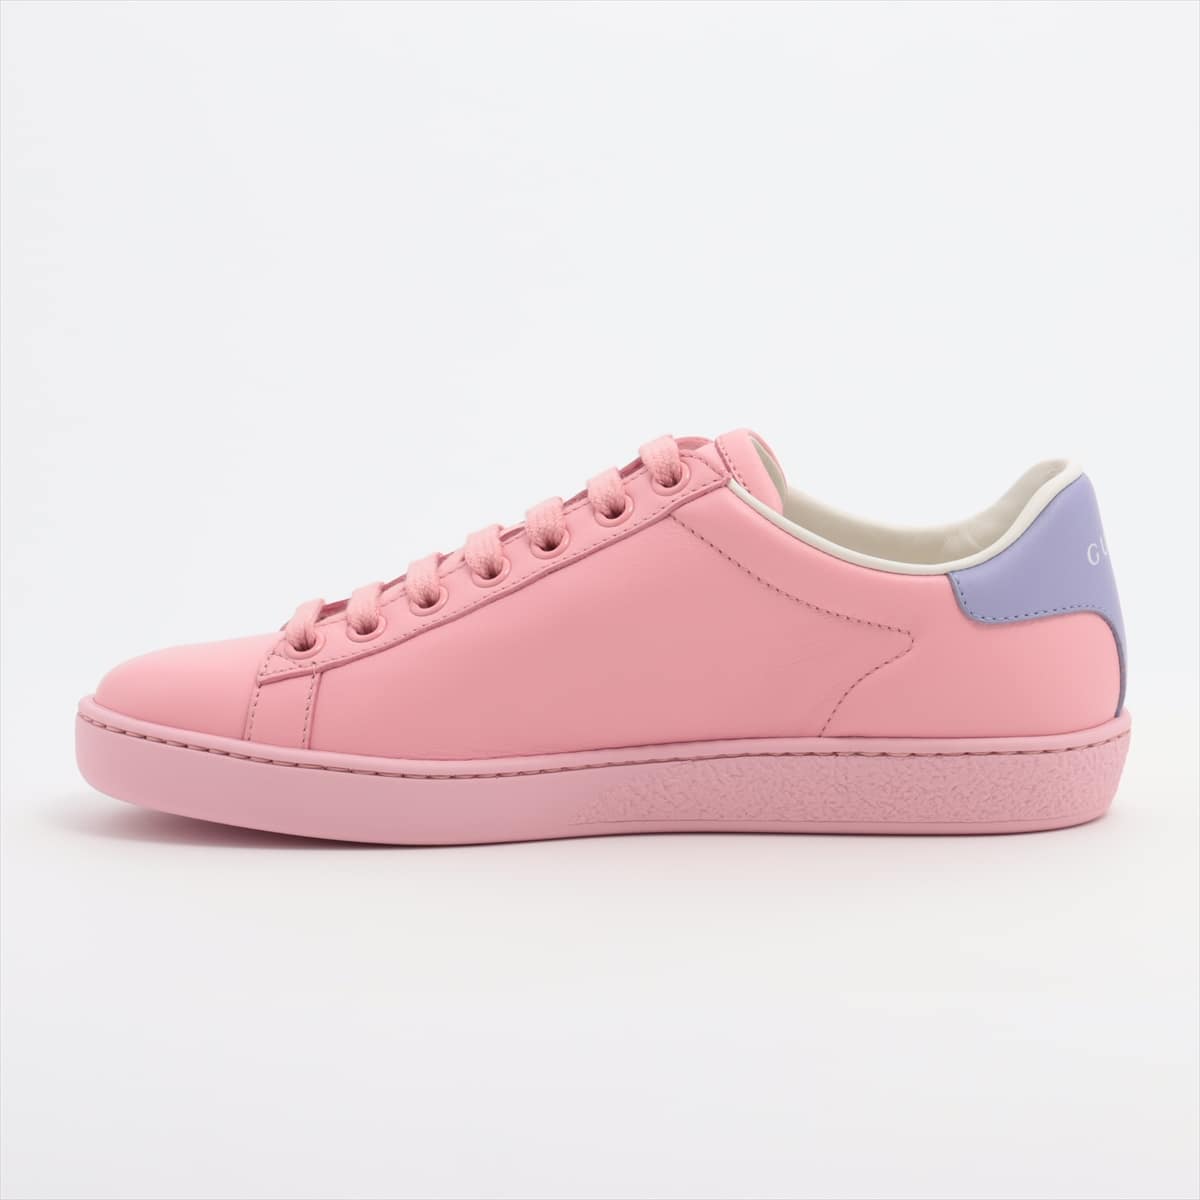 Gucci Interlocking G Leather Sneakers 34 1/2 Ladies' Pink 598527 There is a box